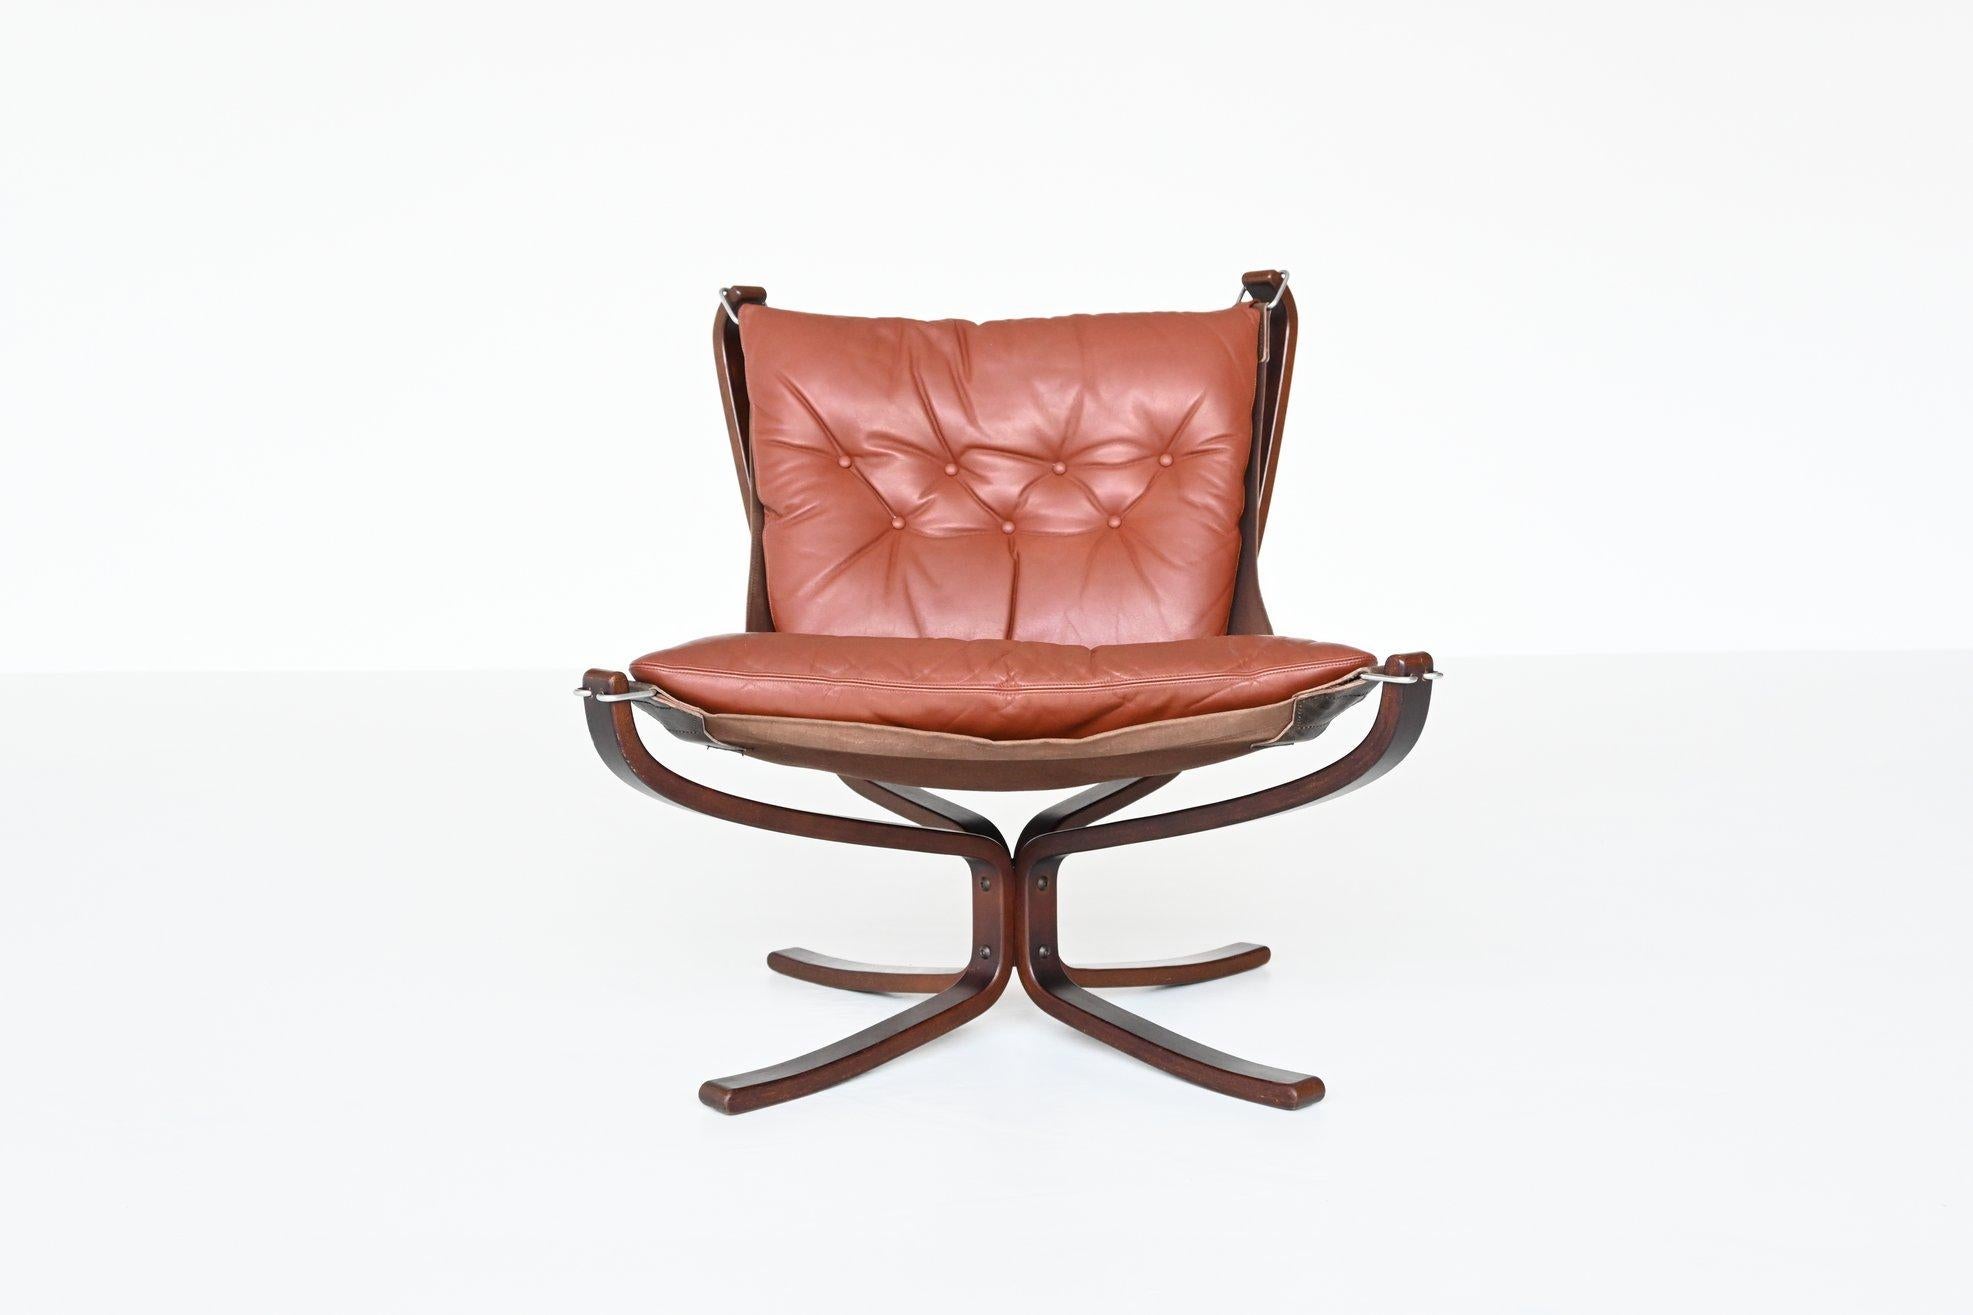 Iconic X-framed low back Falcon lounge chair designed by Sigurd Ressell for Vatne Mobler, Norway 1970. It features a curved stained beech wooden frame, canvas sling and cognac brown leather cushion. The hammock style floating seat has become a